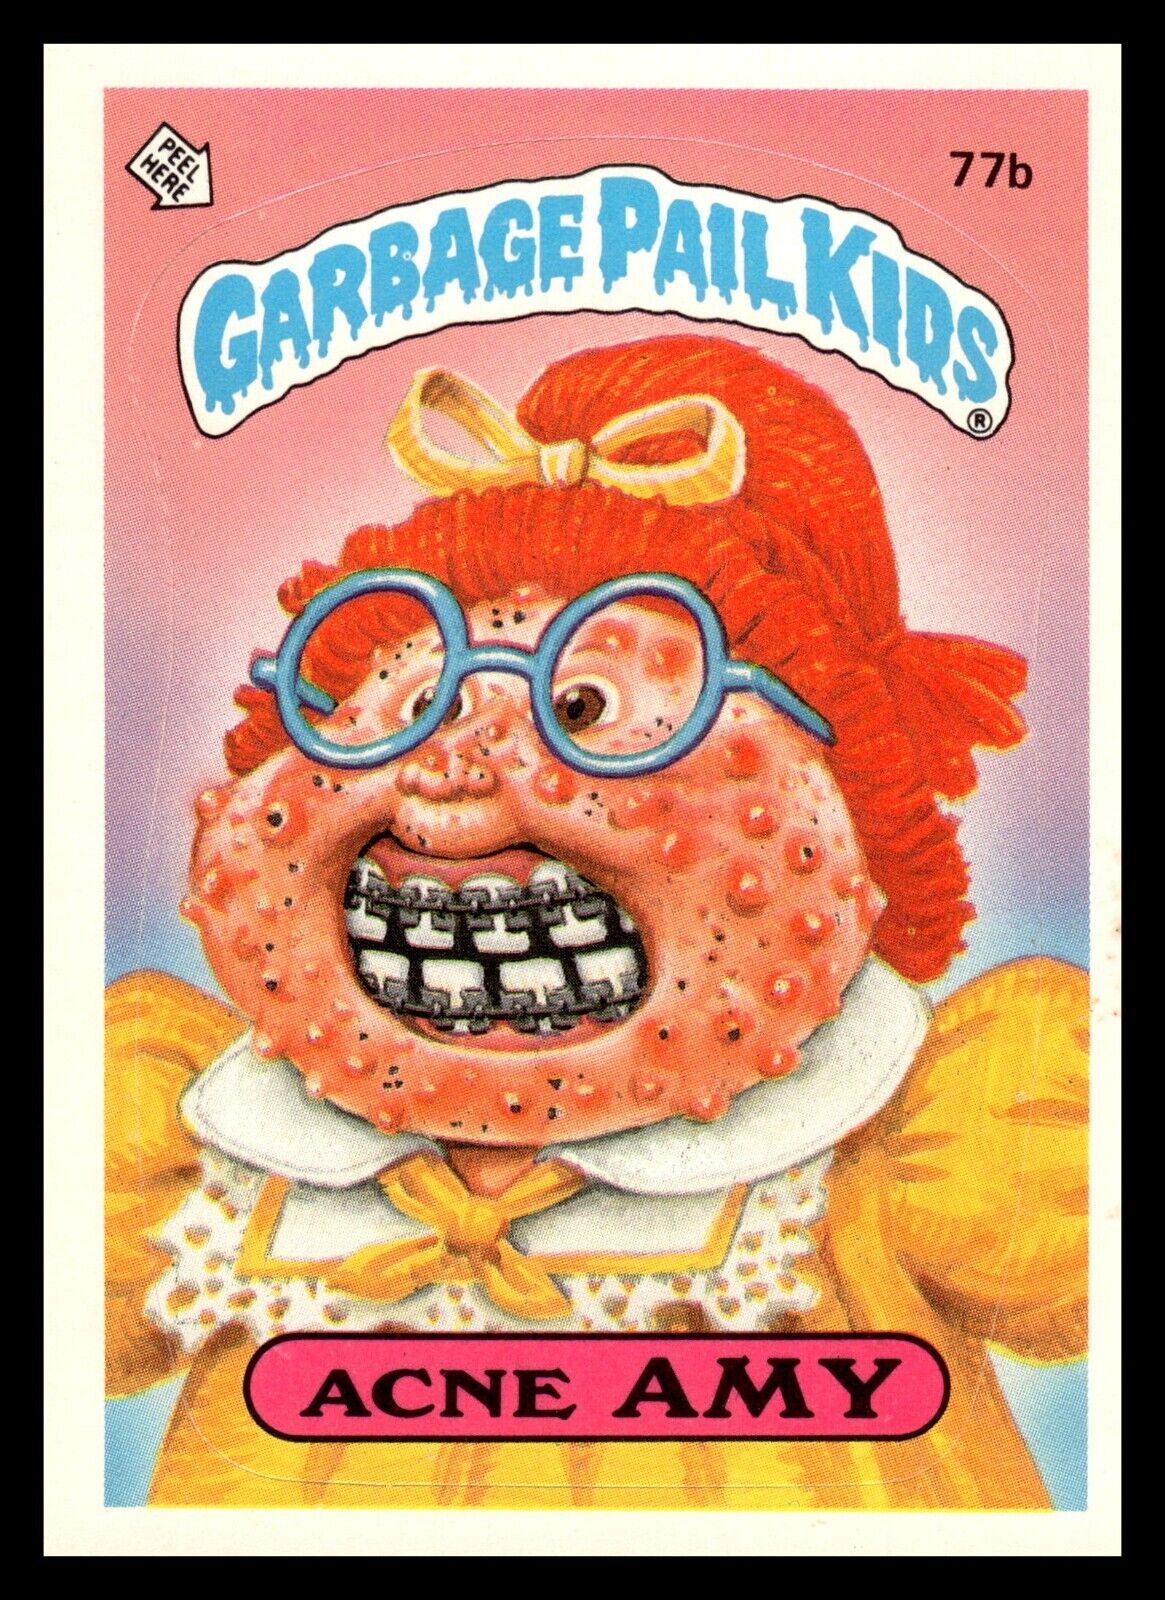 1985 Topps Garbage Pail Kids Series 2 Acne Amy 77b GLOSSY BACK PUZZLE